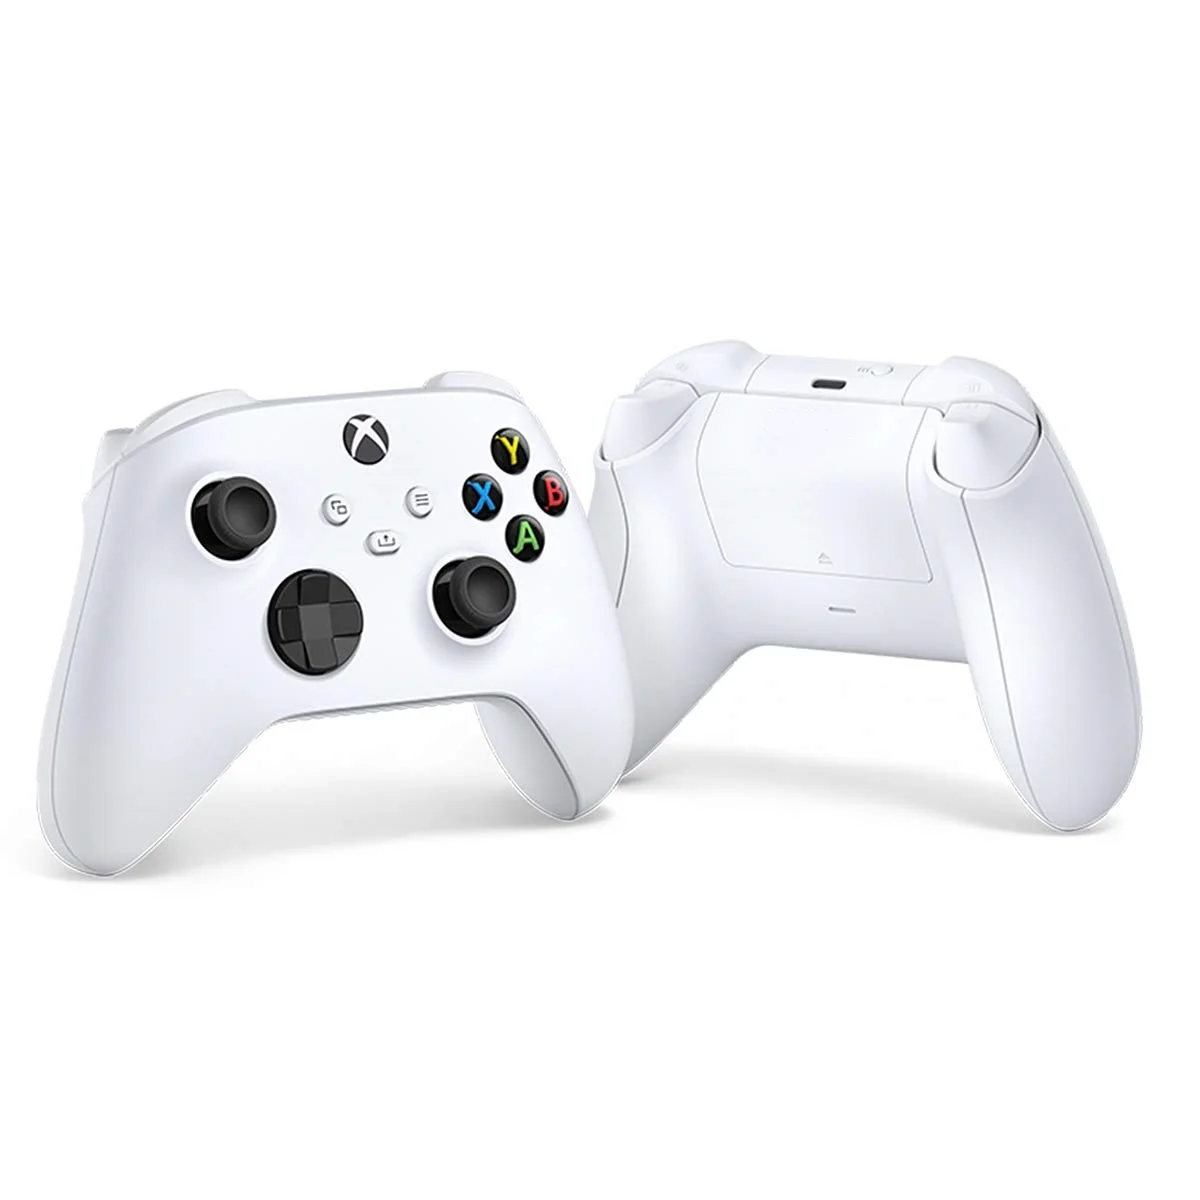 FOR New Original Gamepad For Xbox One S Gaming Wireless Joystick Remote Controller Jogos Mando Console High Performance For PC